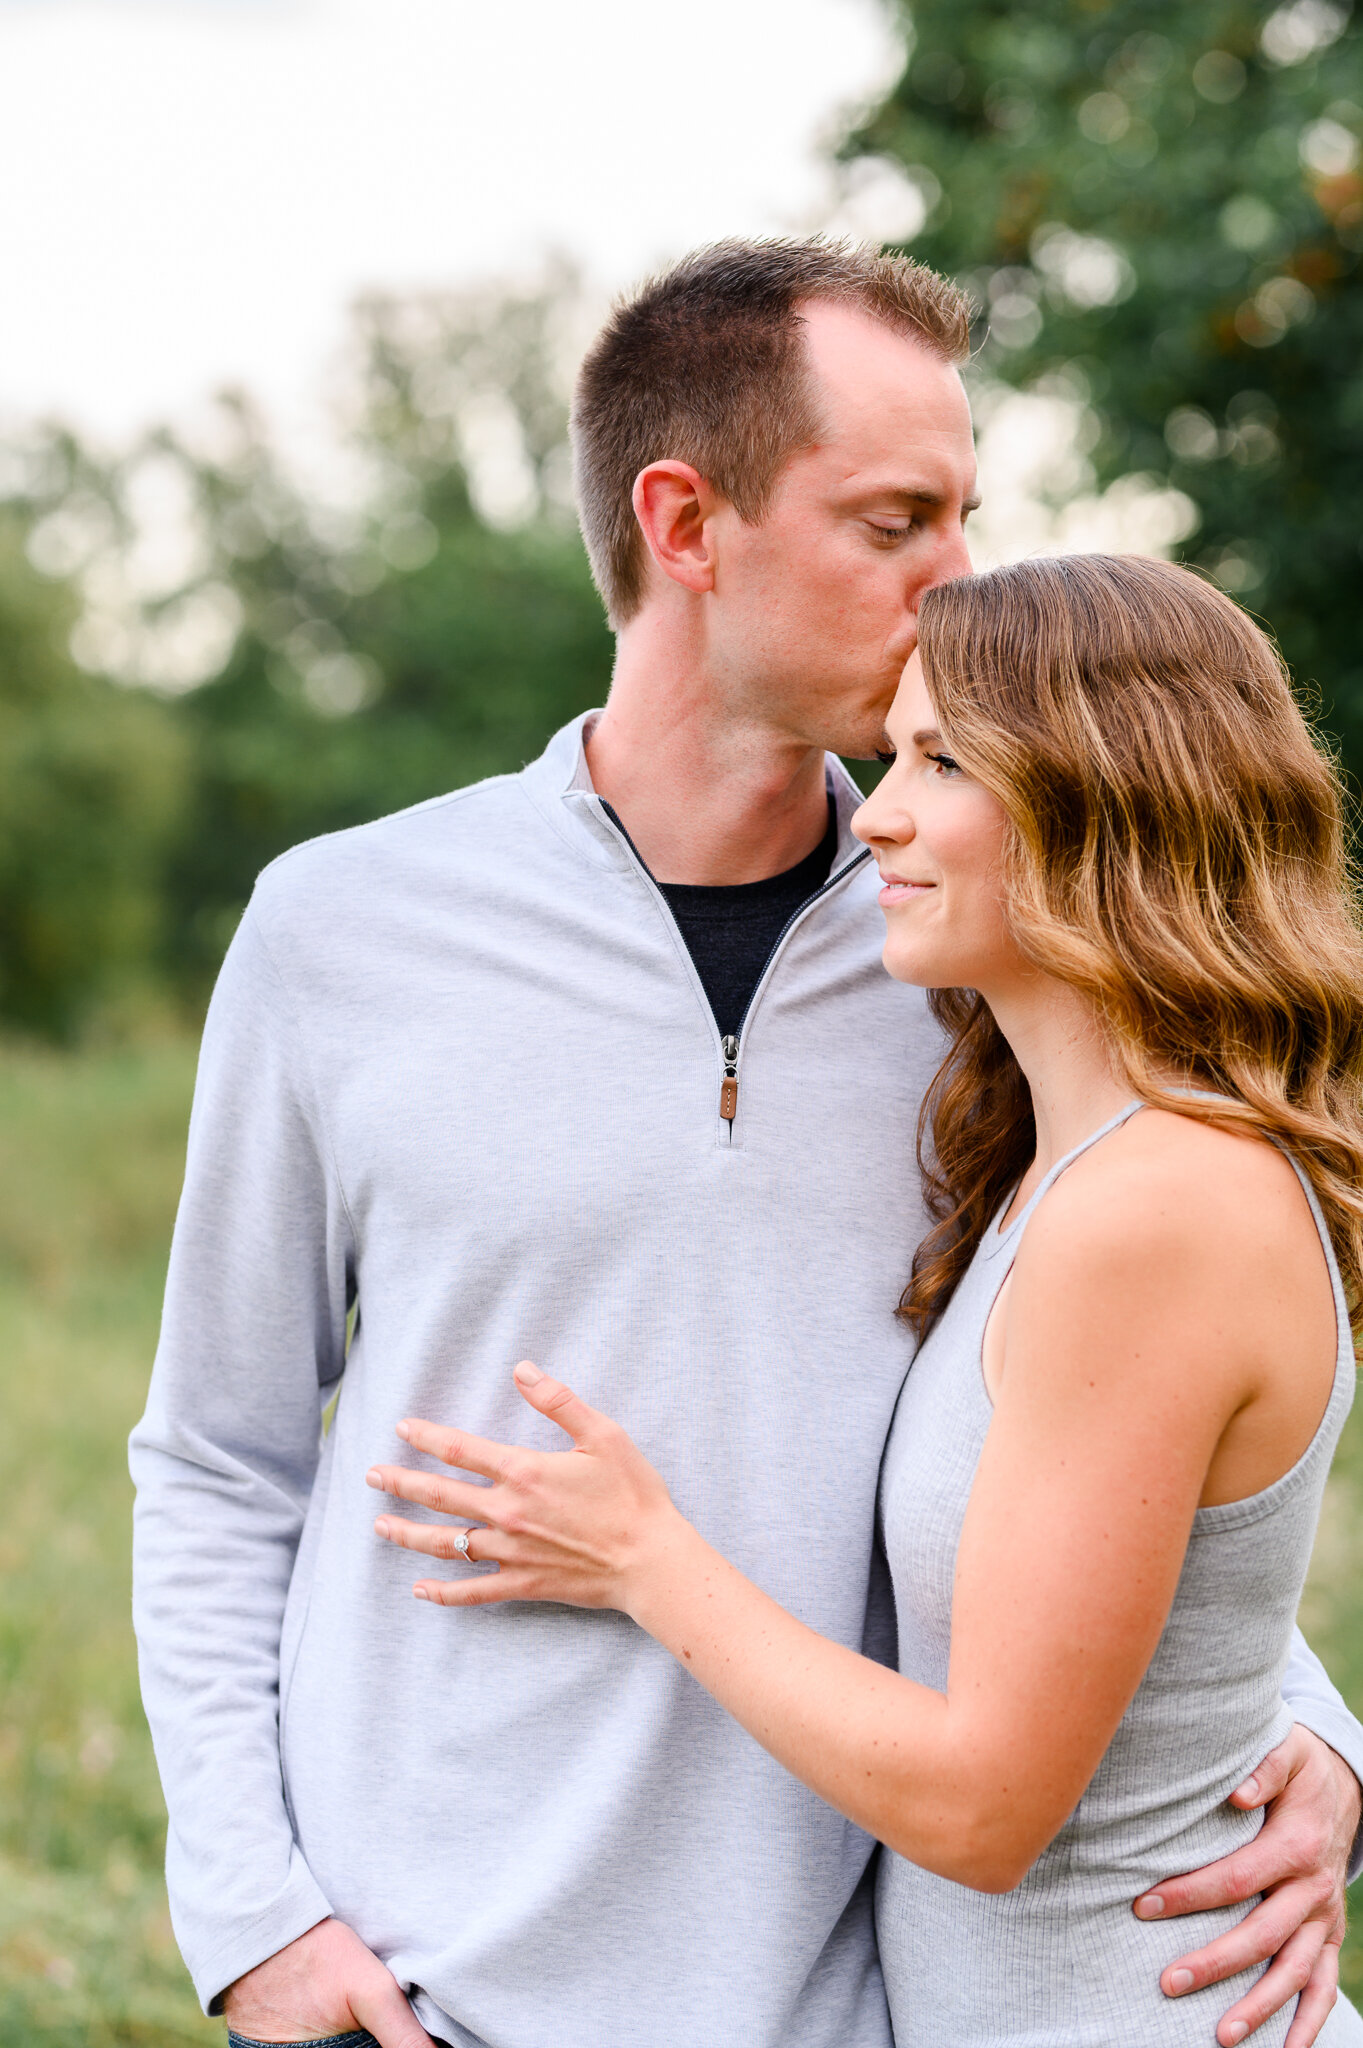 Gabby + Kyle  Engagement Session with Phil the Golden Retriever — Chelsea  Joy Photography